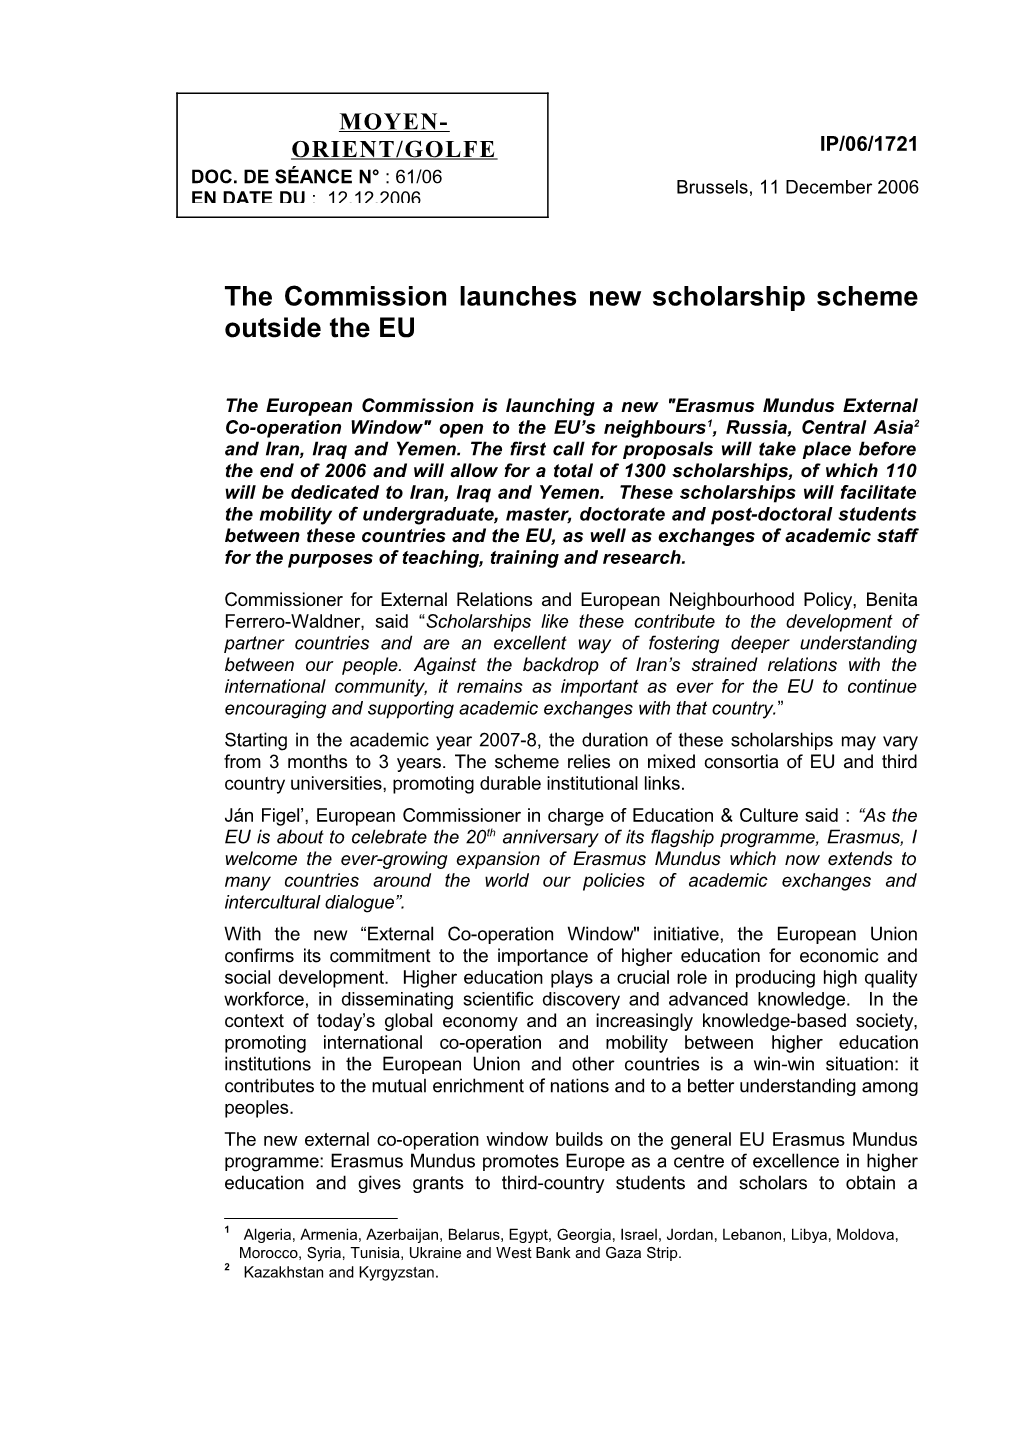 The Commission Launches New Scholarship Scheme Outside the EU